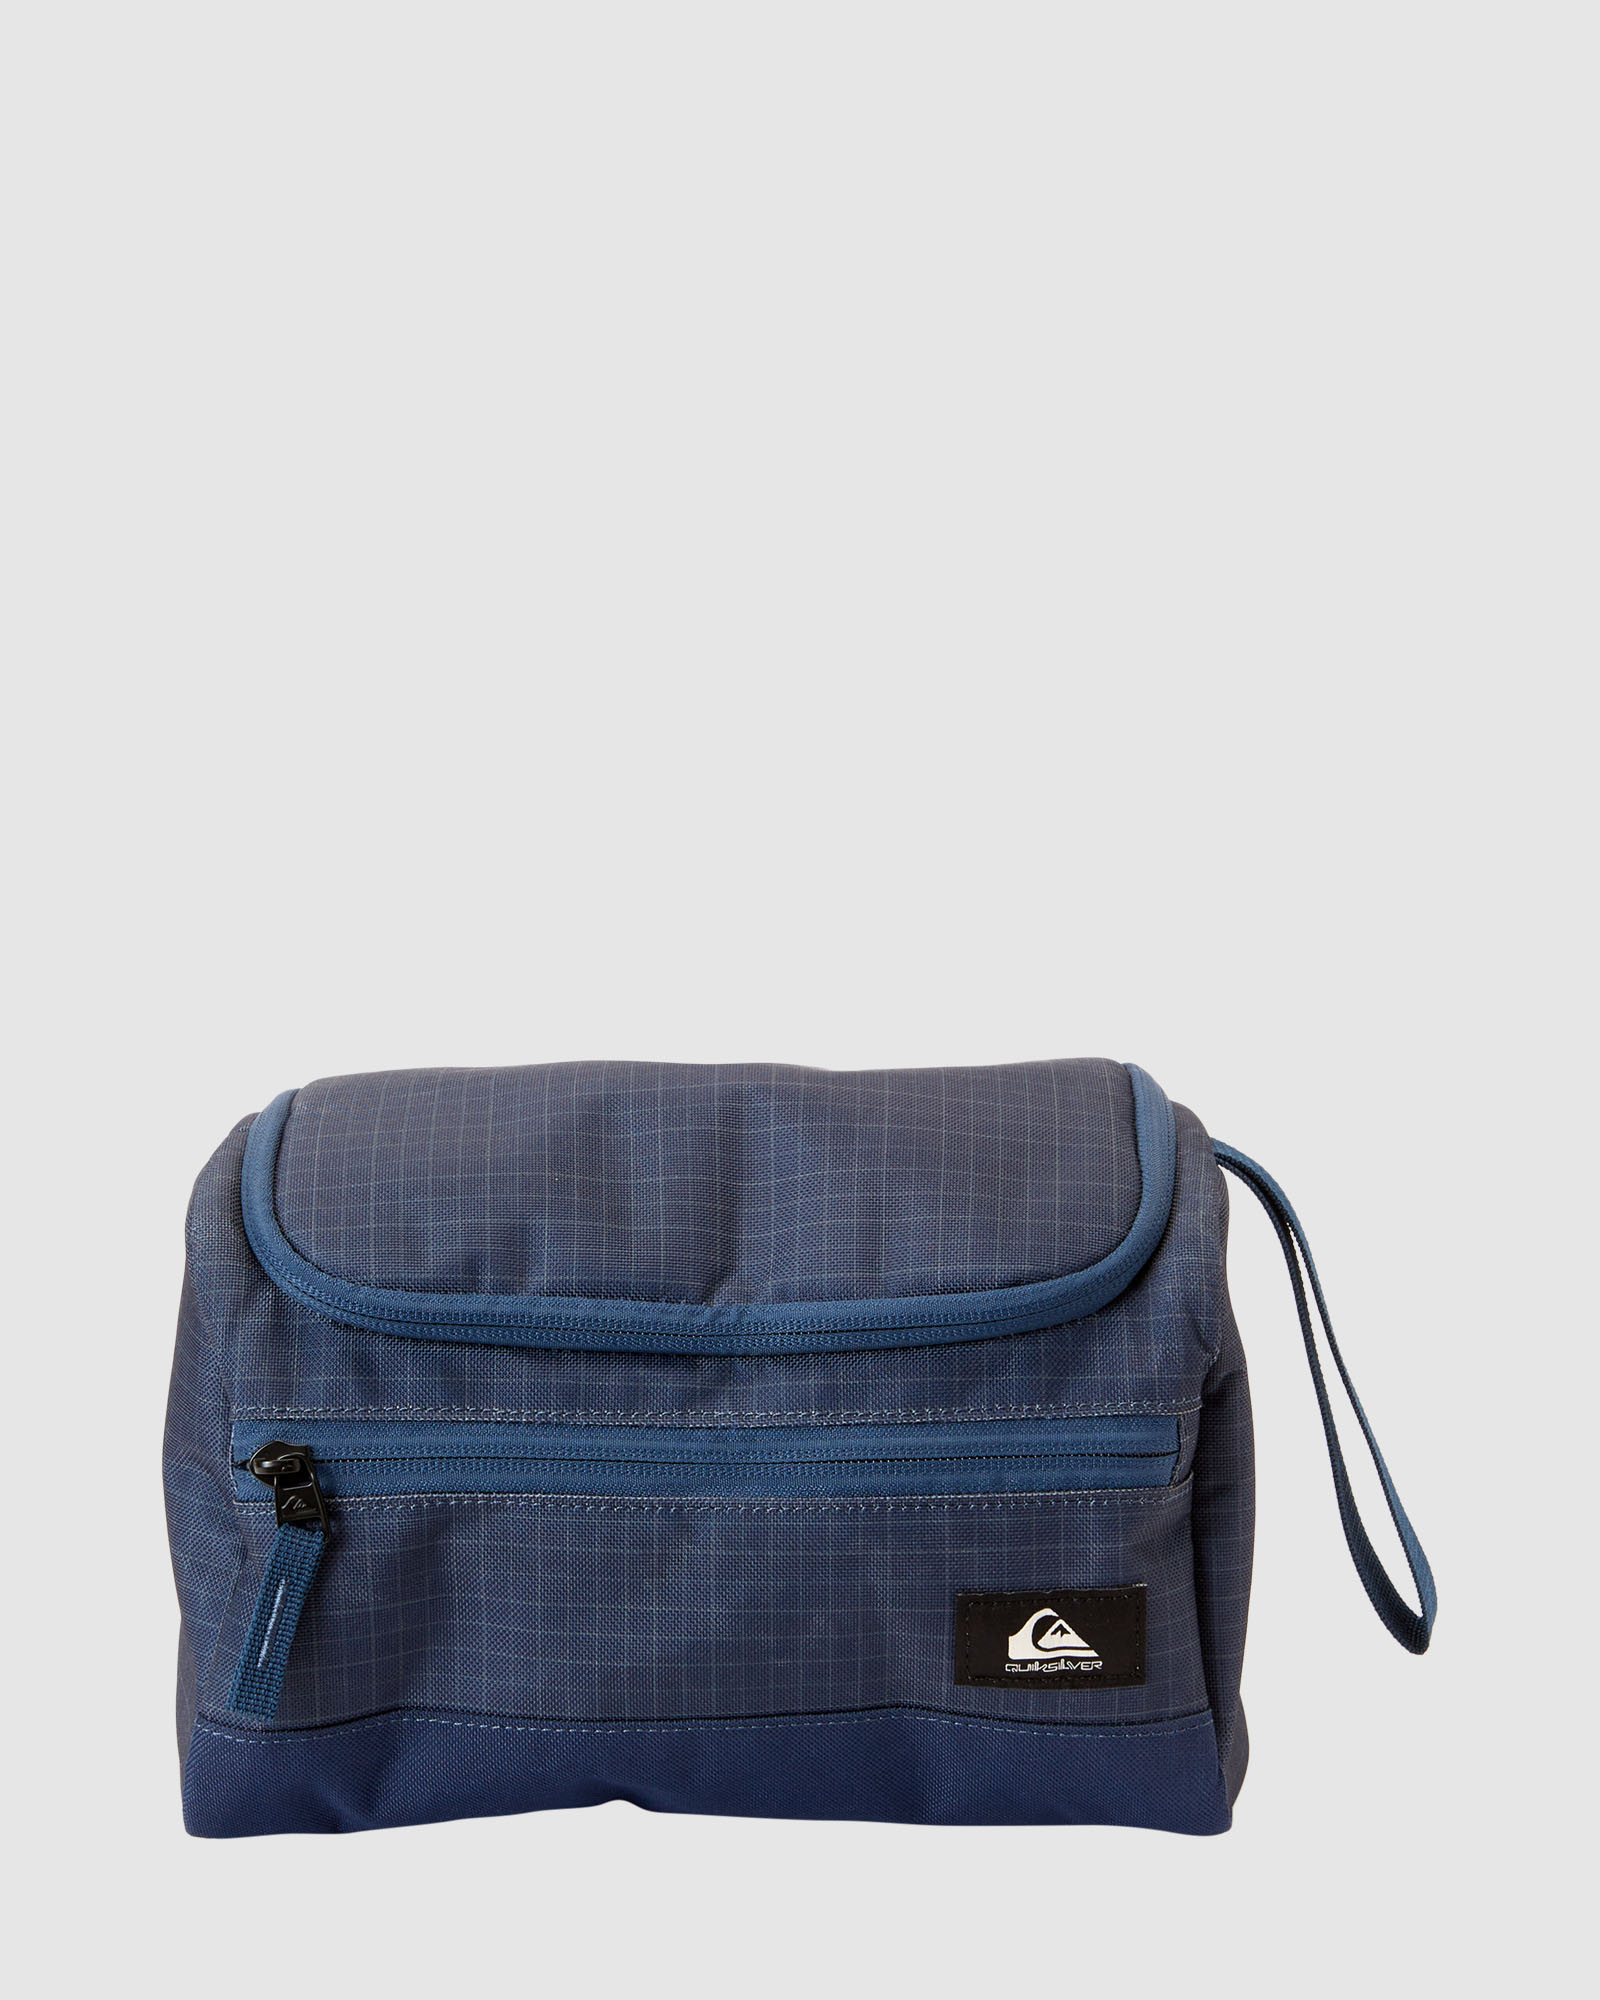 Quiksilver Capsule - Naval Academy | SurfStitch